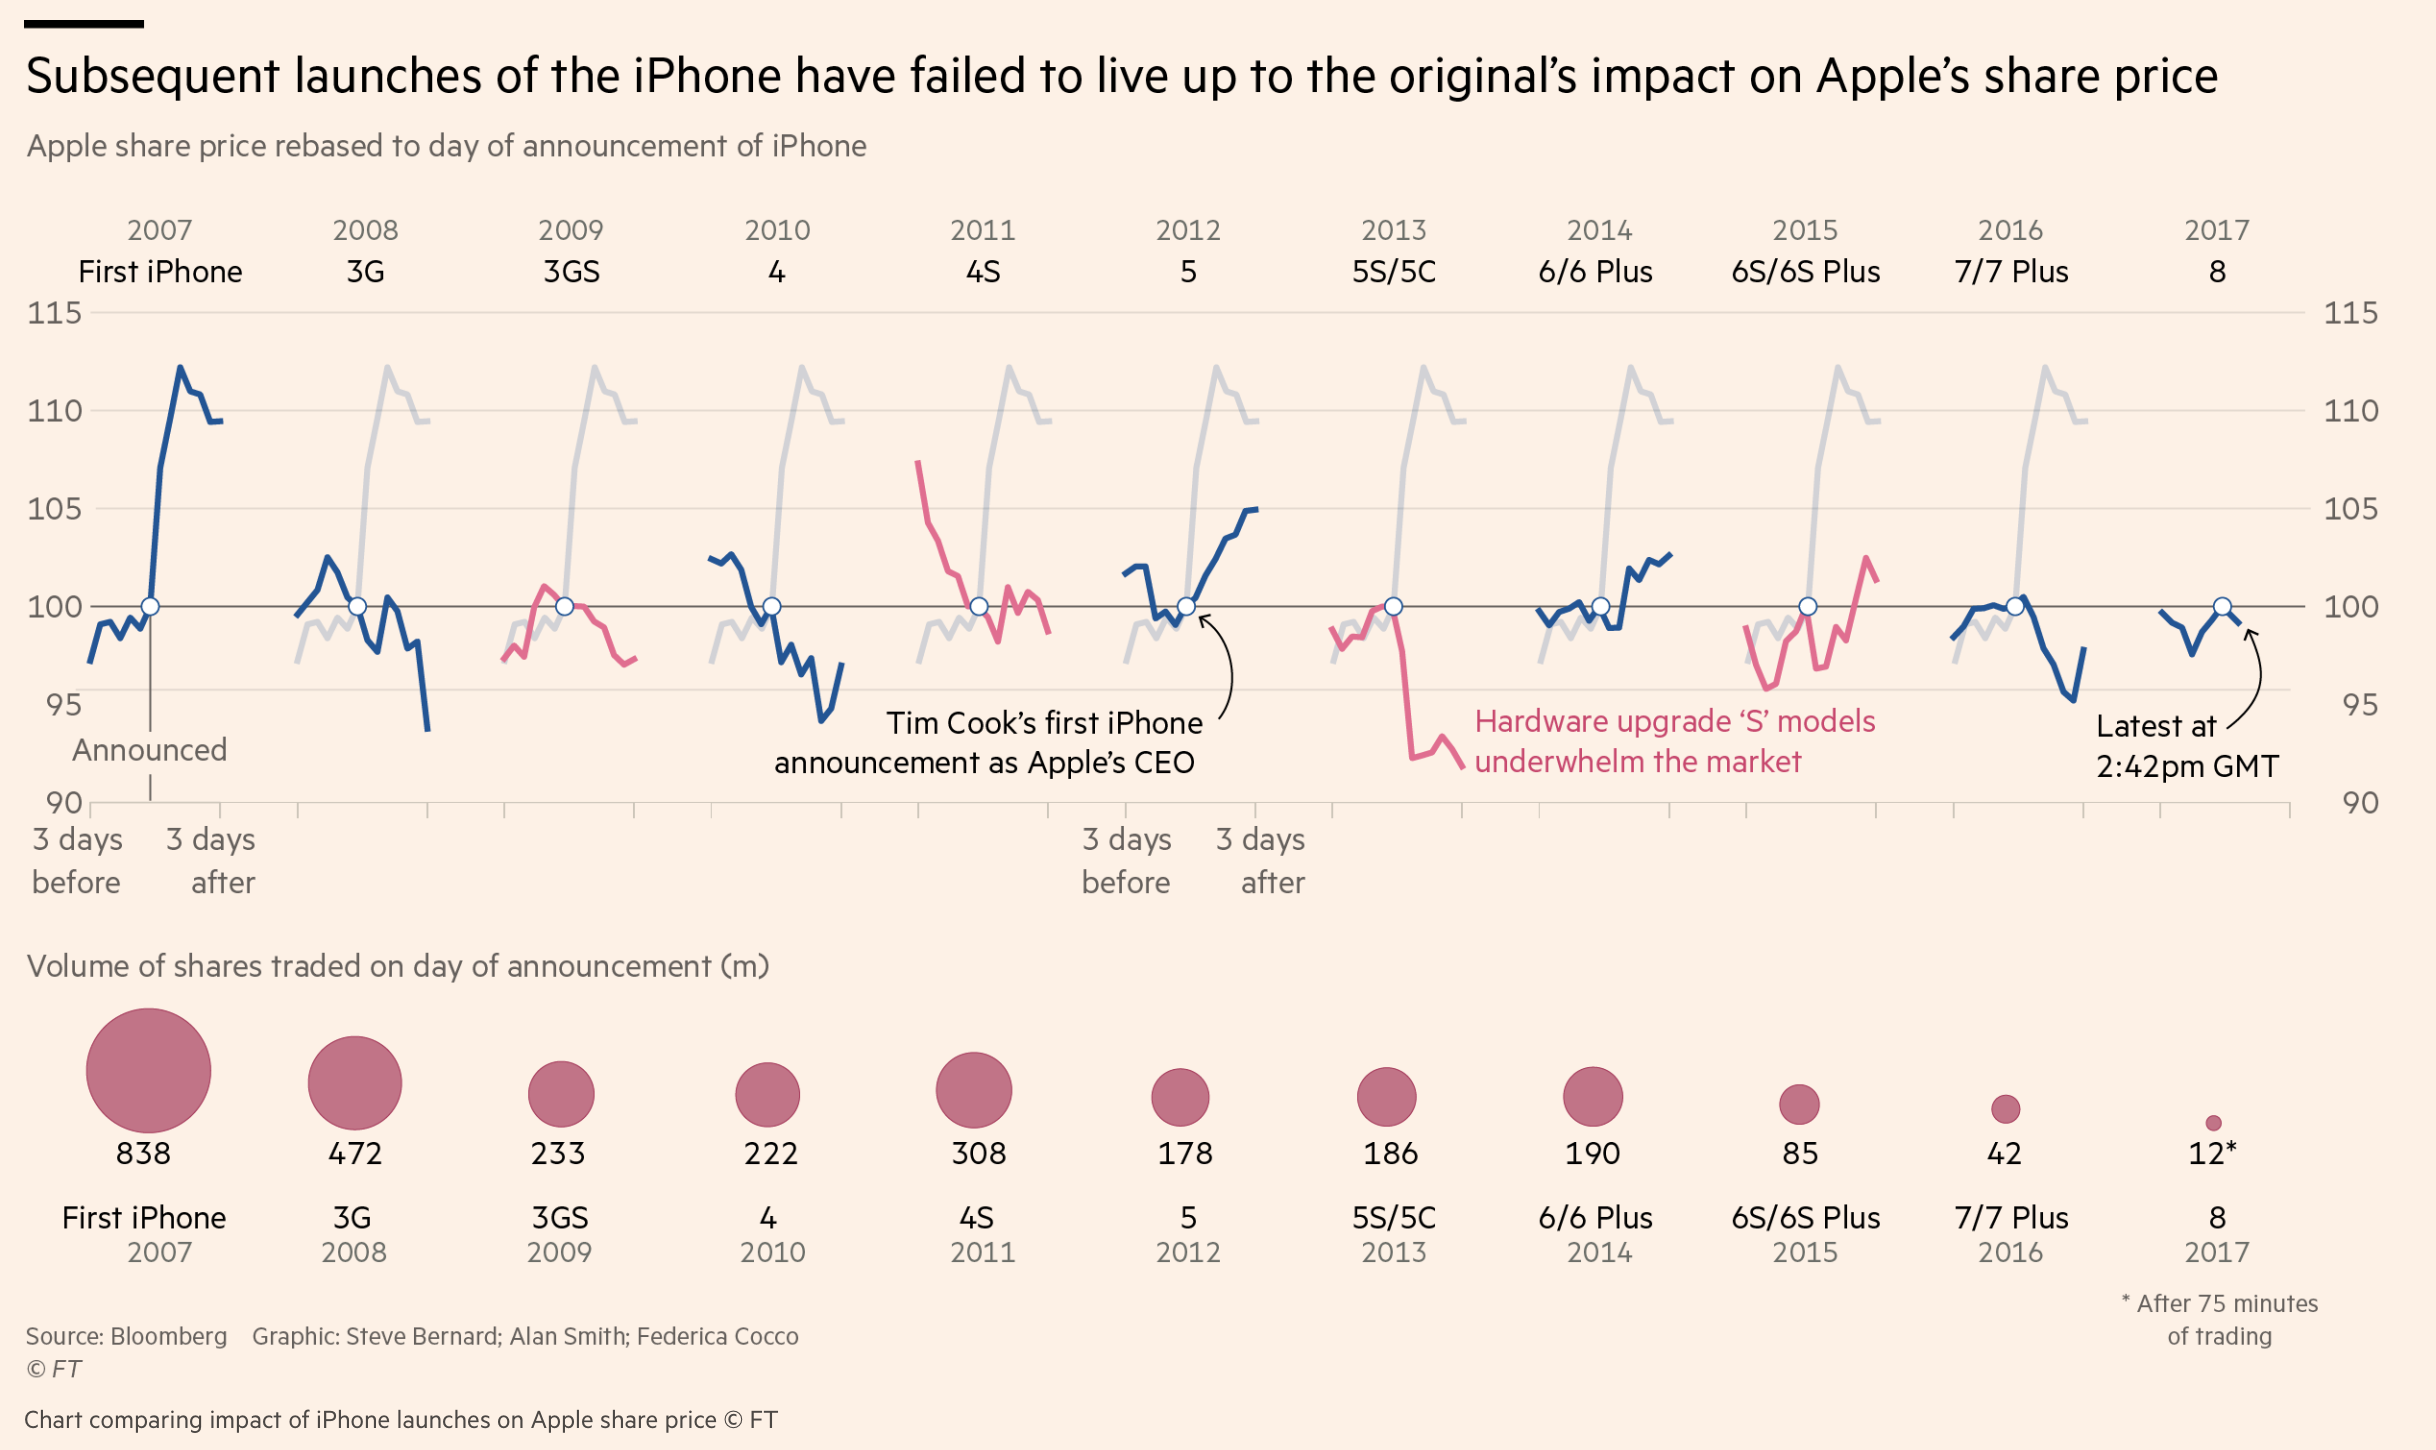 aapl\_iphone\_announcments.png